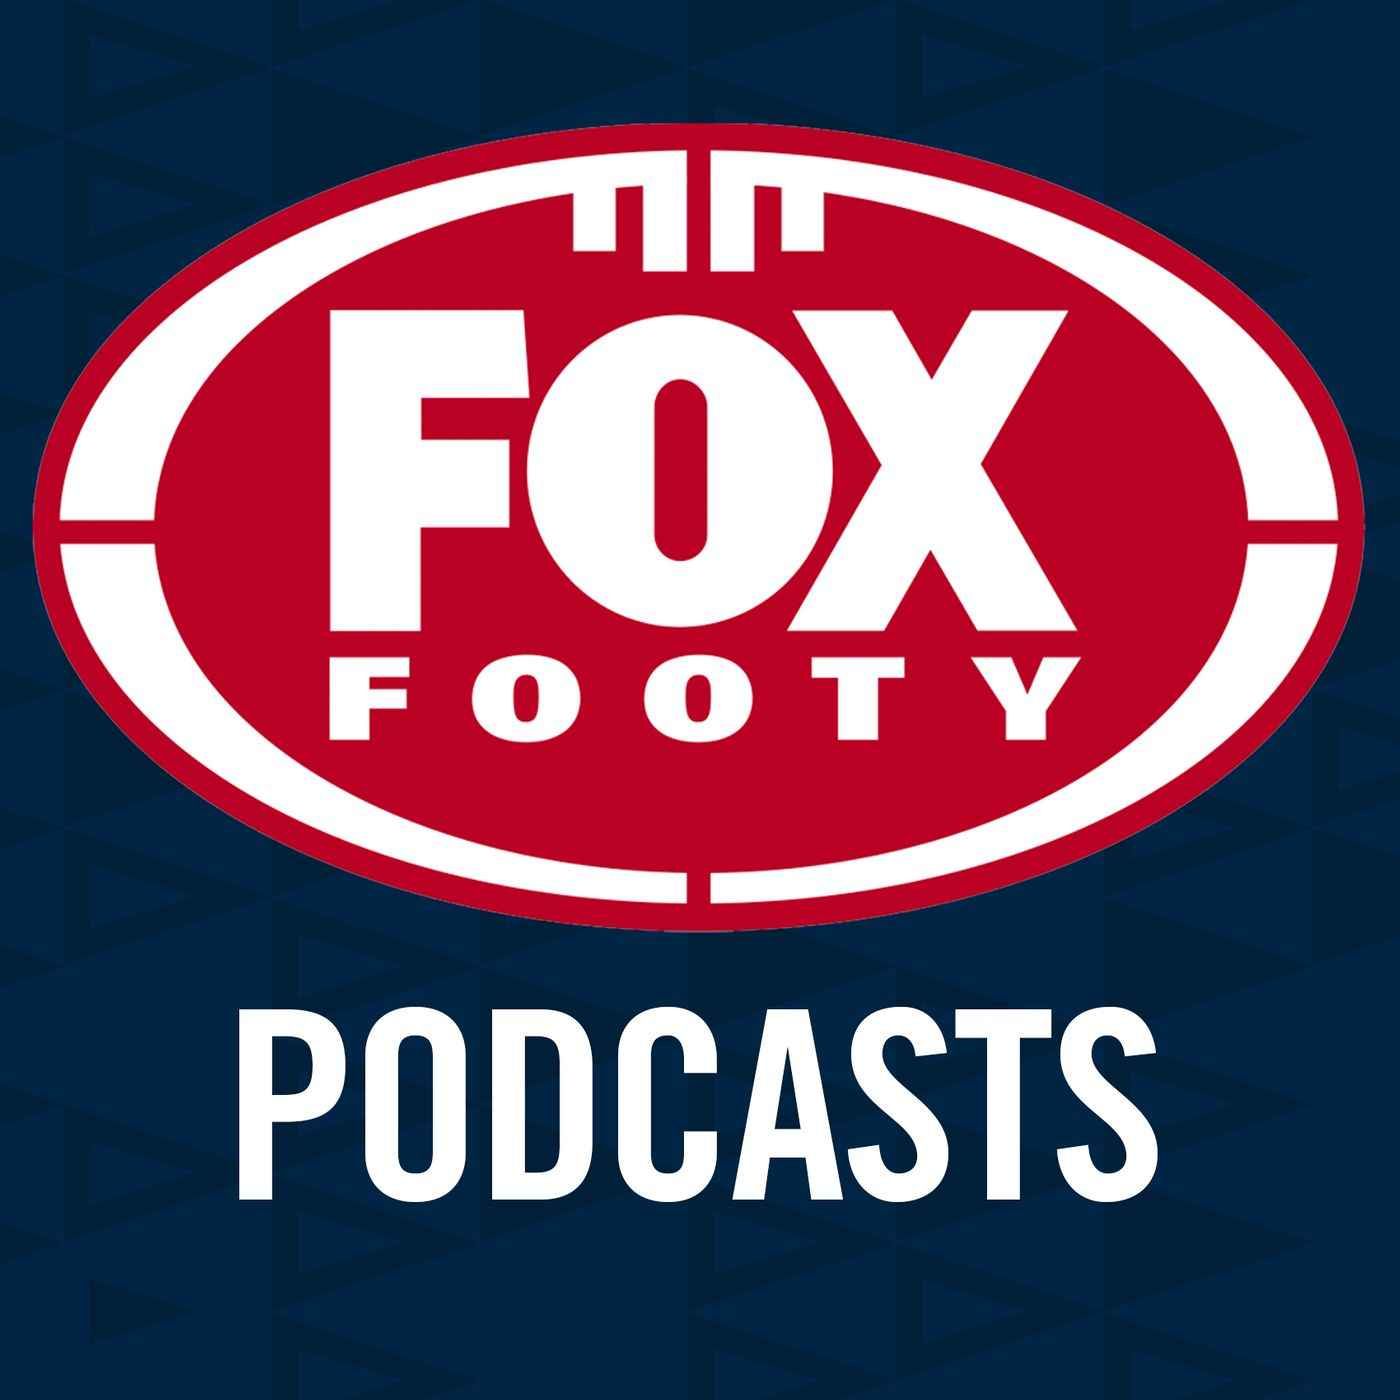 Fox Footy Podcast: Fixture reveal and a quiet No.1 seed